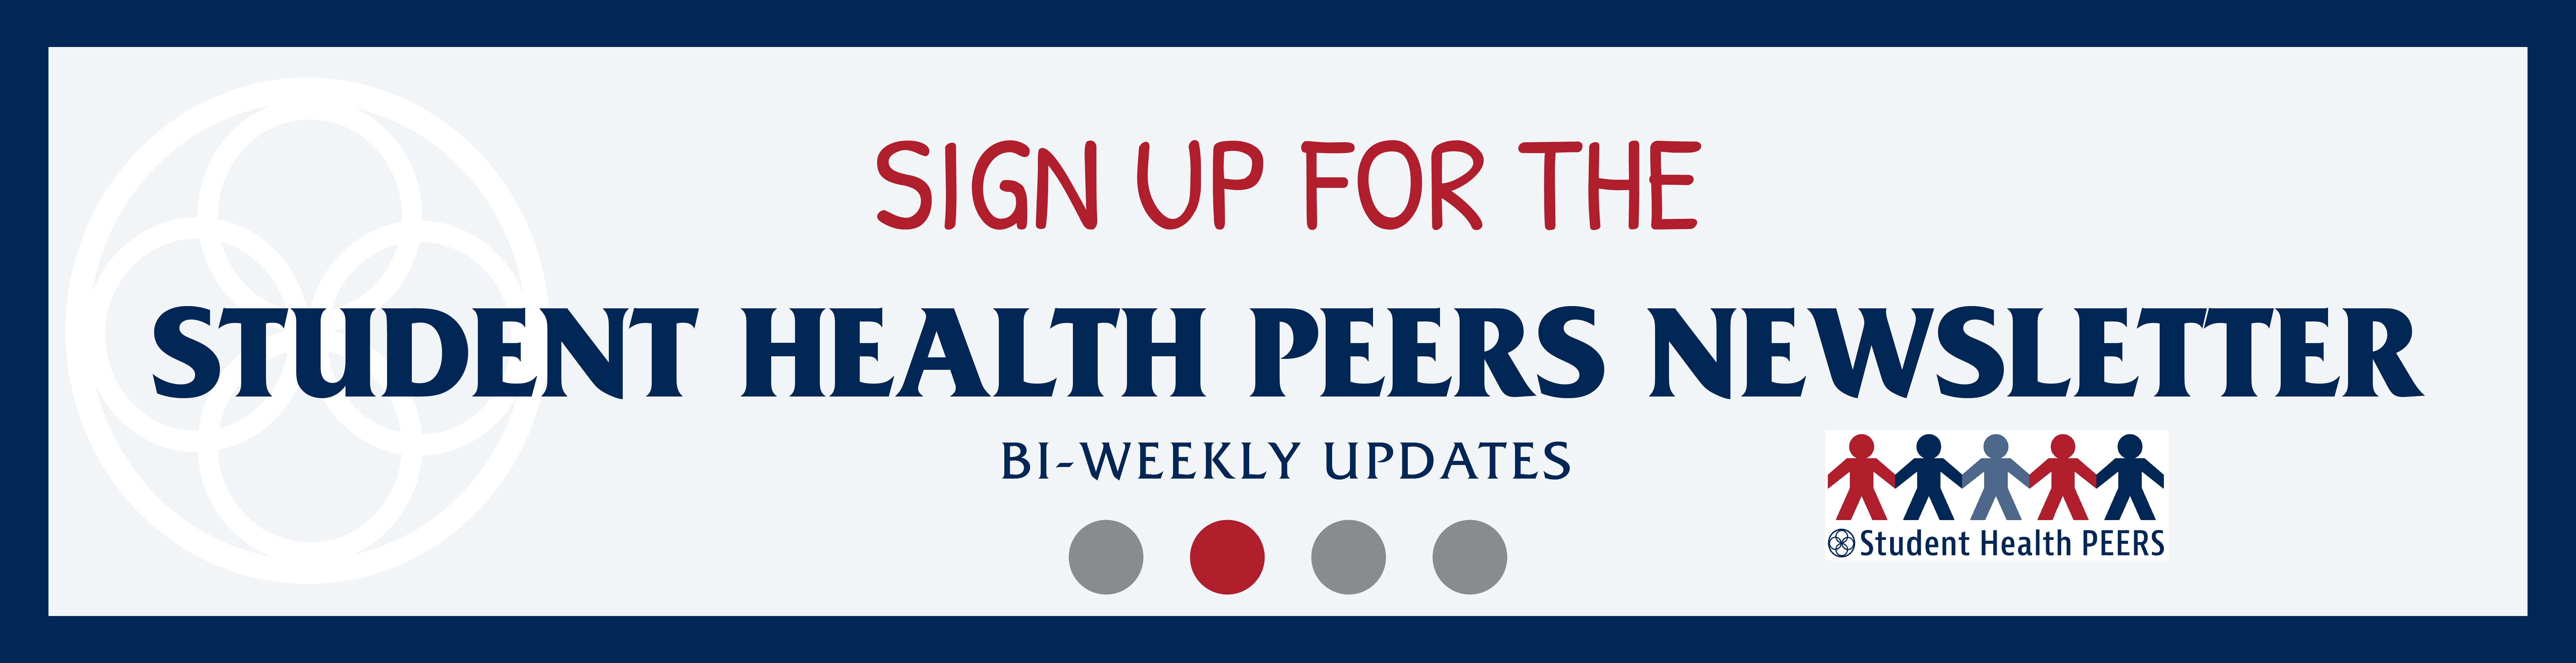 Sign up for the Student Health Peers Newsletter - Bi Weekly Updates